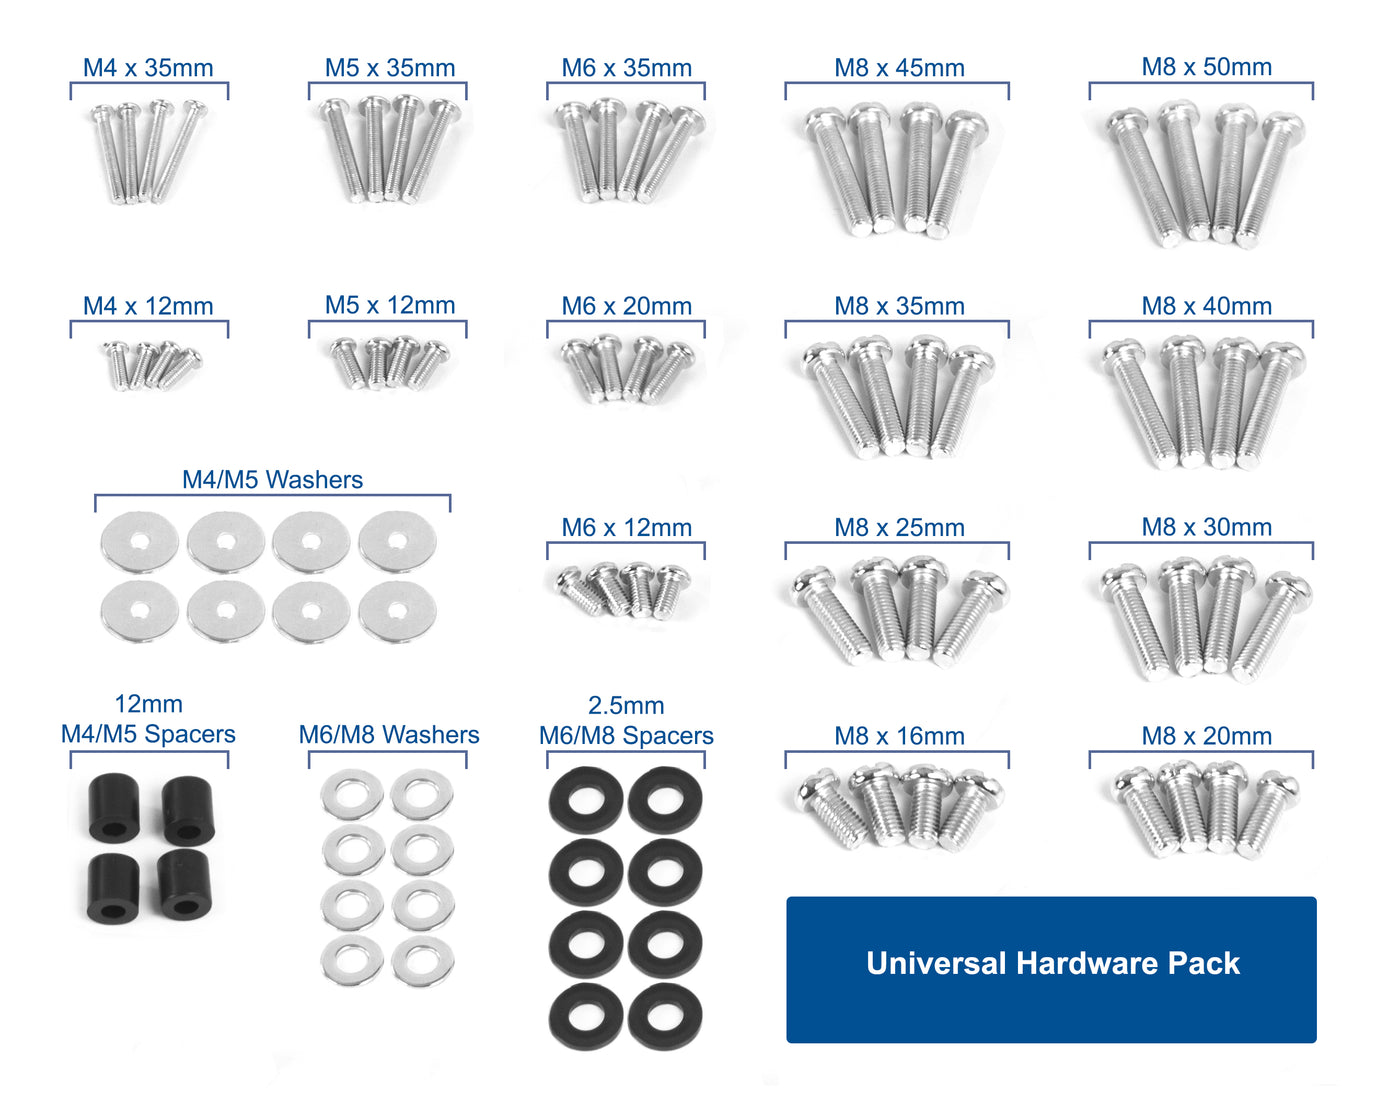 Organized universal hardware pack containing bolts, washers, and spacers.